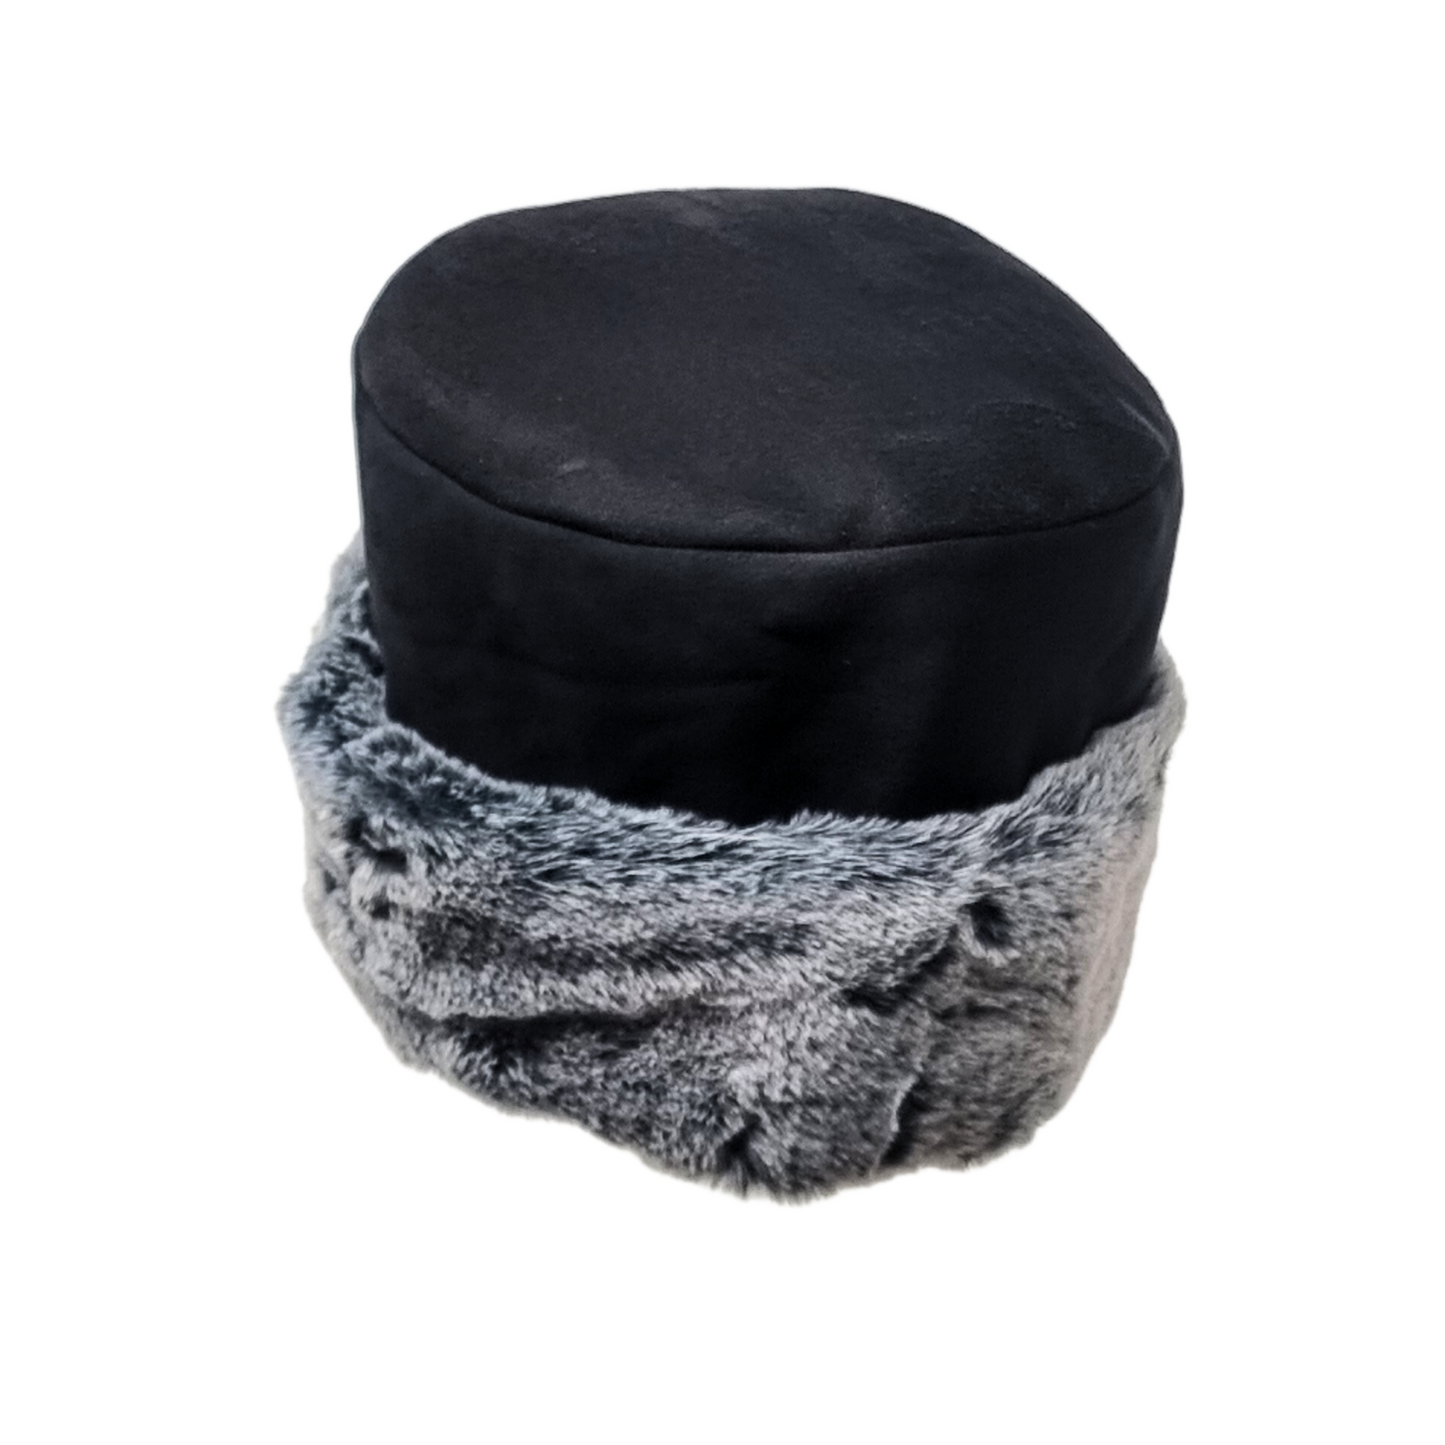 Adult hat with Trim